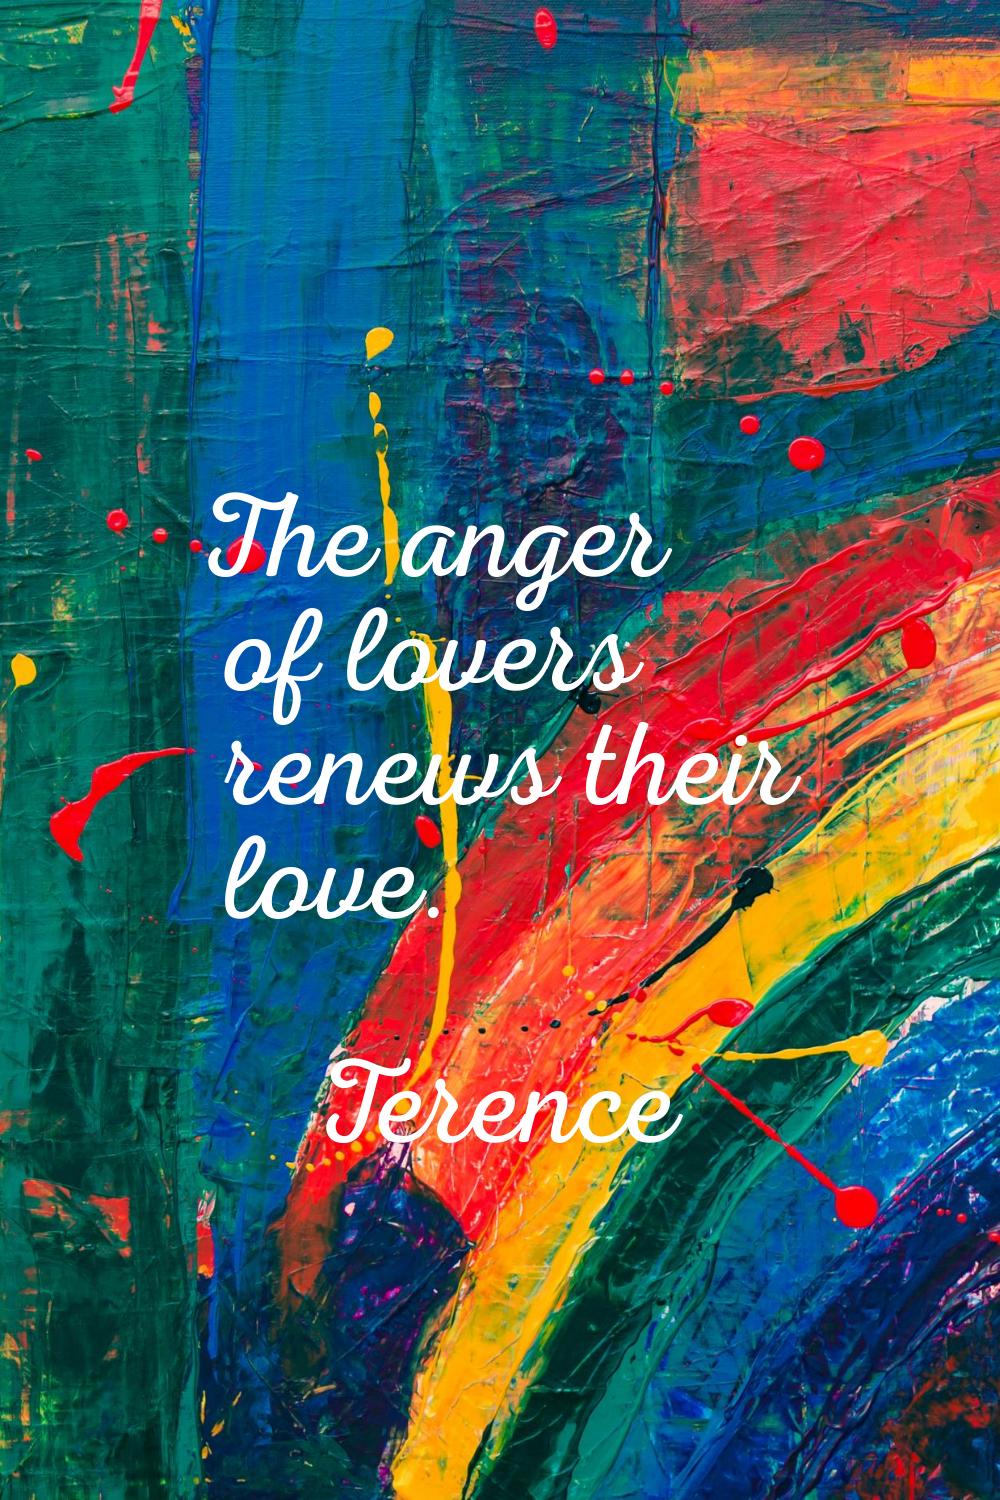 The anger of lovers renews their love.